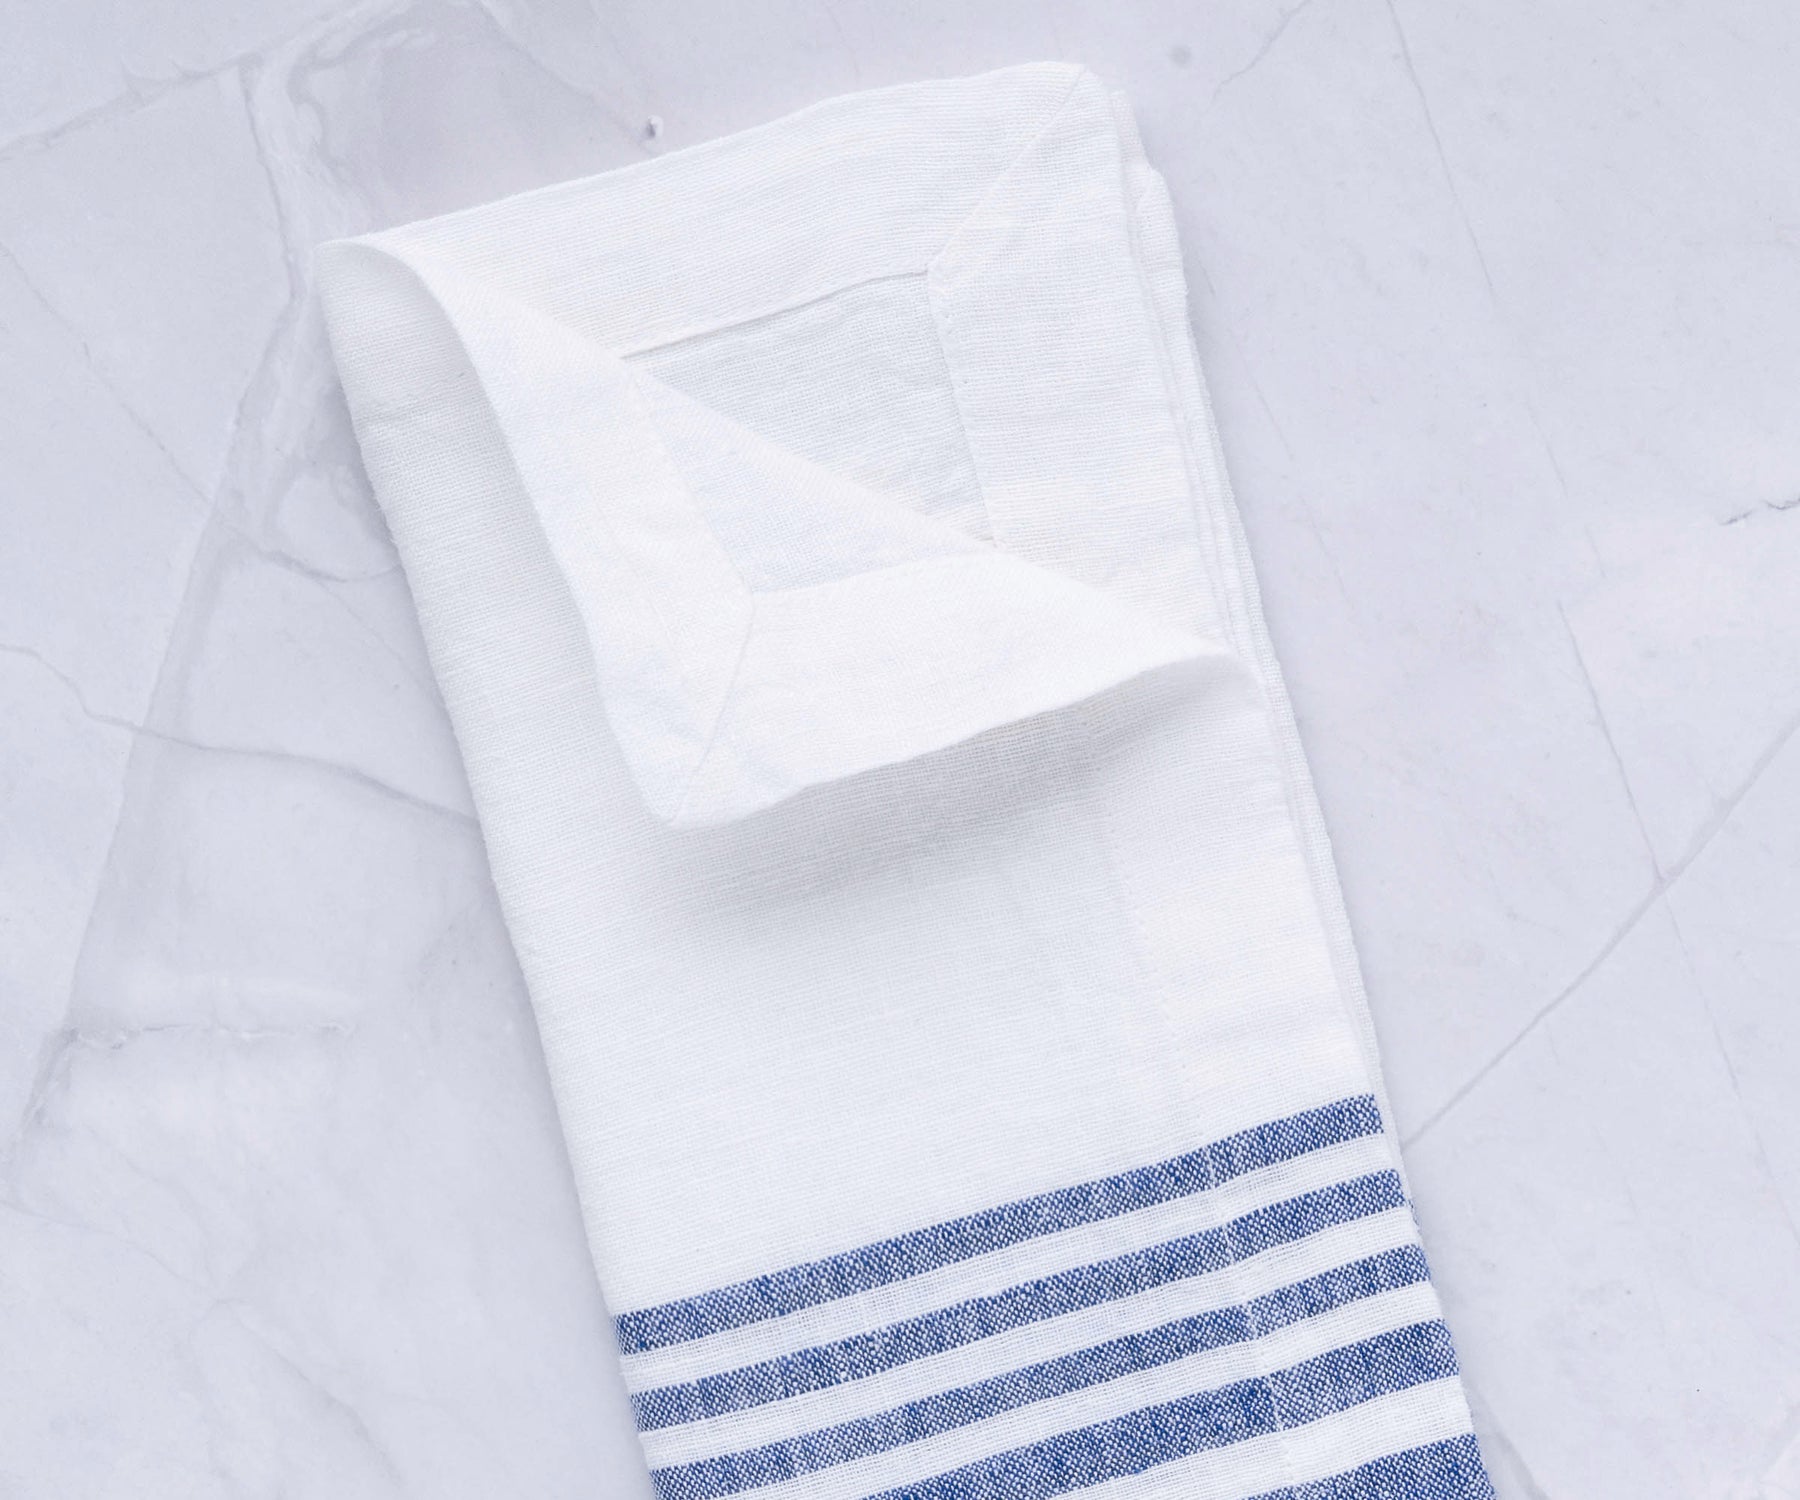 Linen dinner napkin with blue stripes arranged on a marble countertop